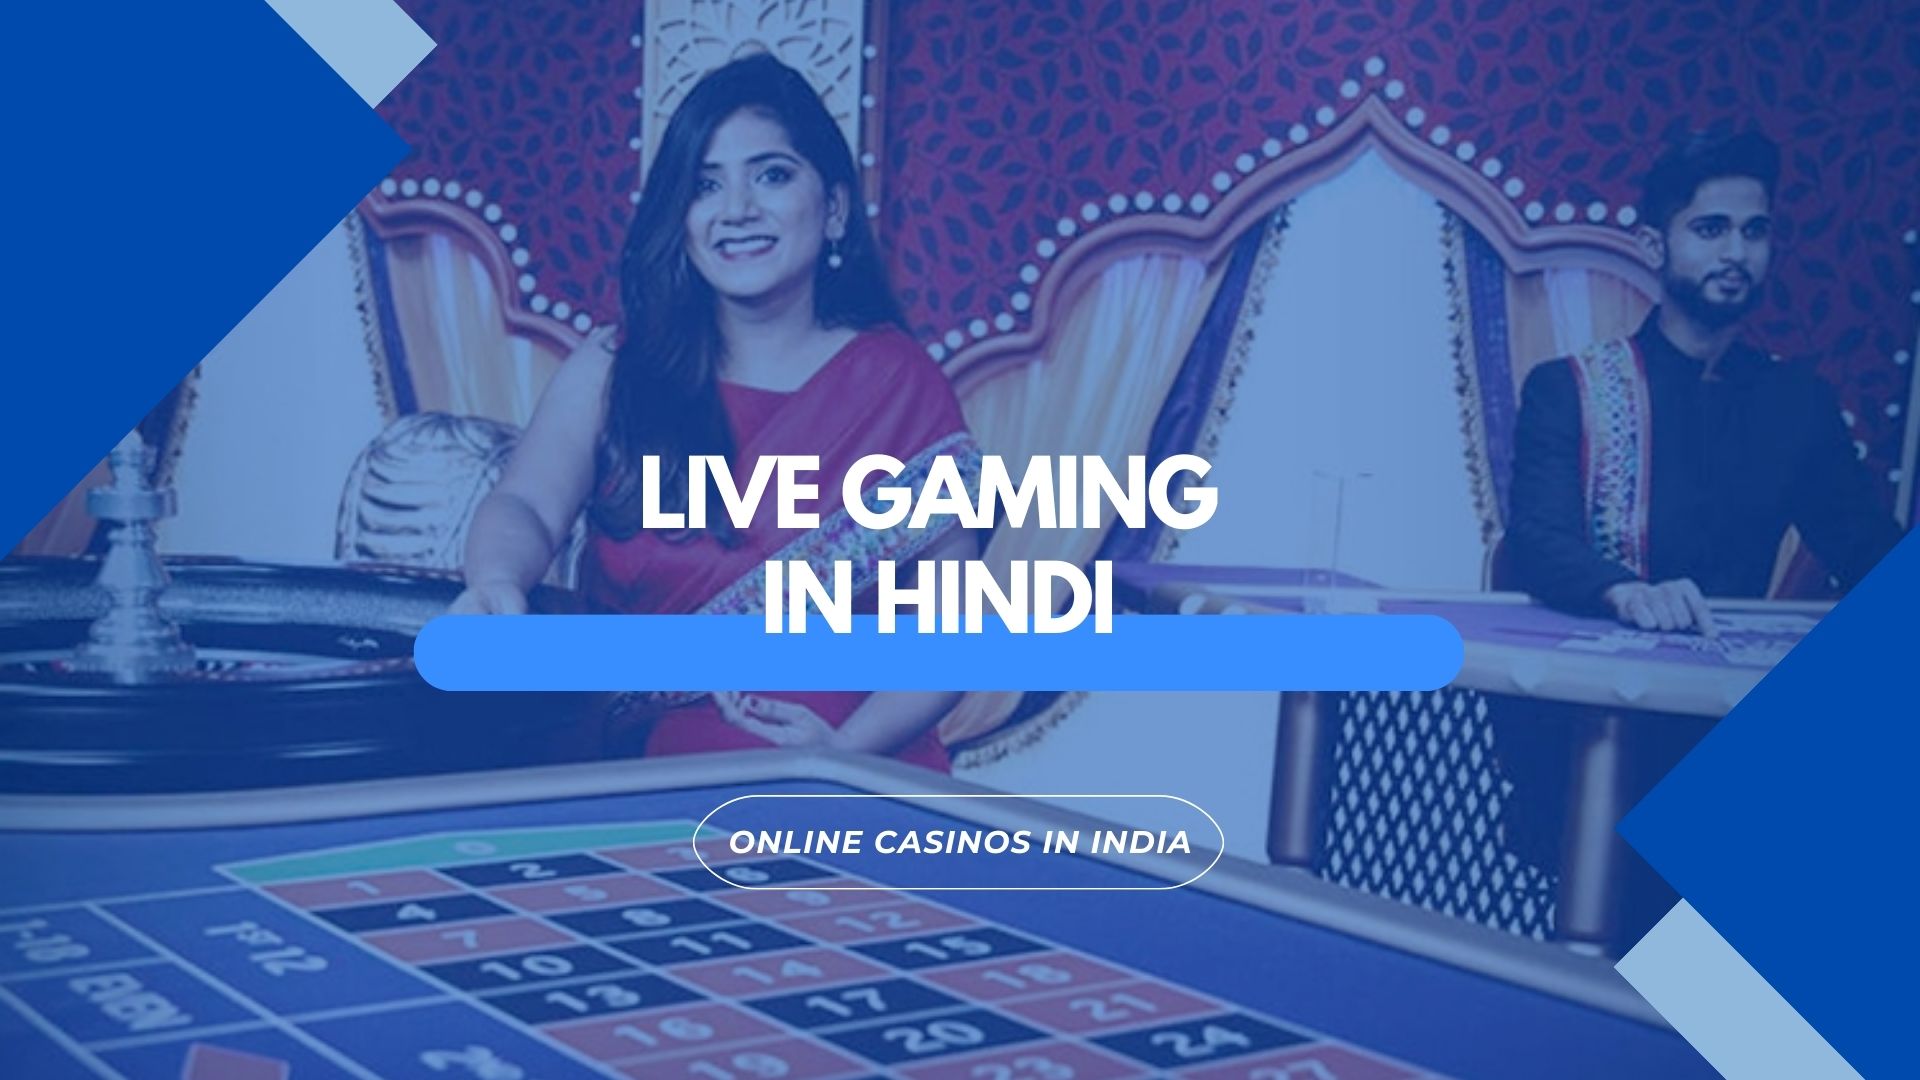 Live Gaming in Hindi at Online Casino